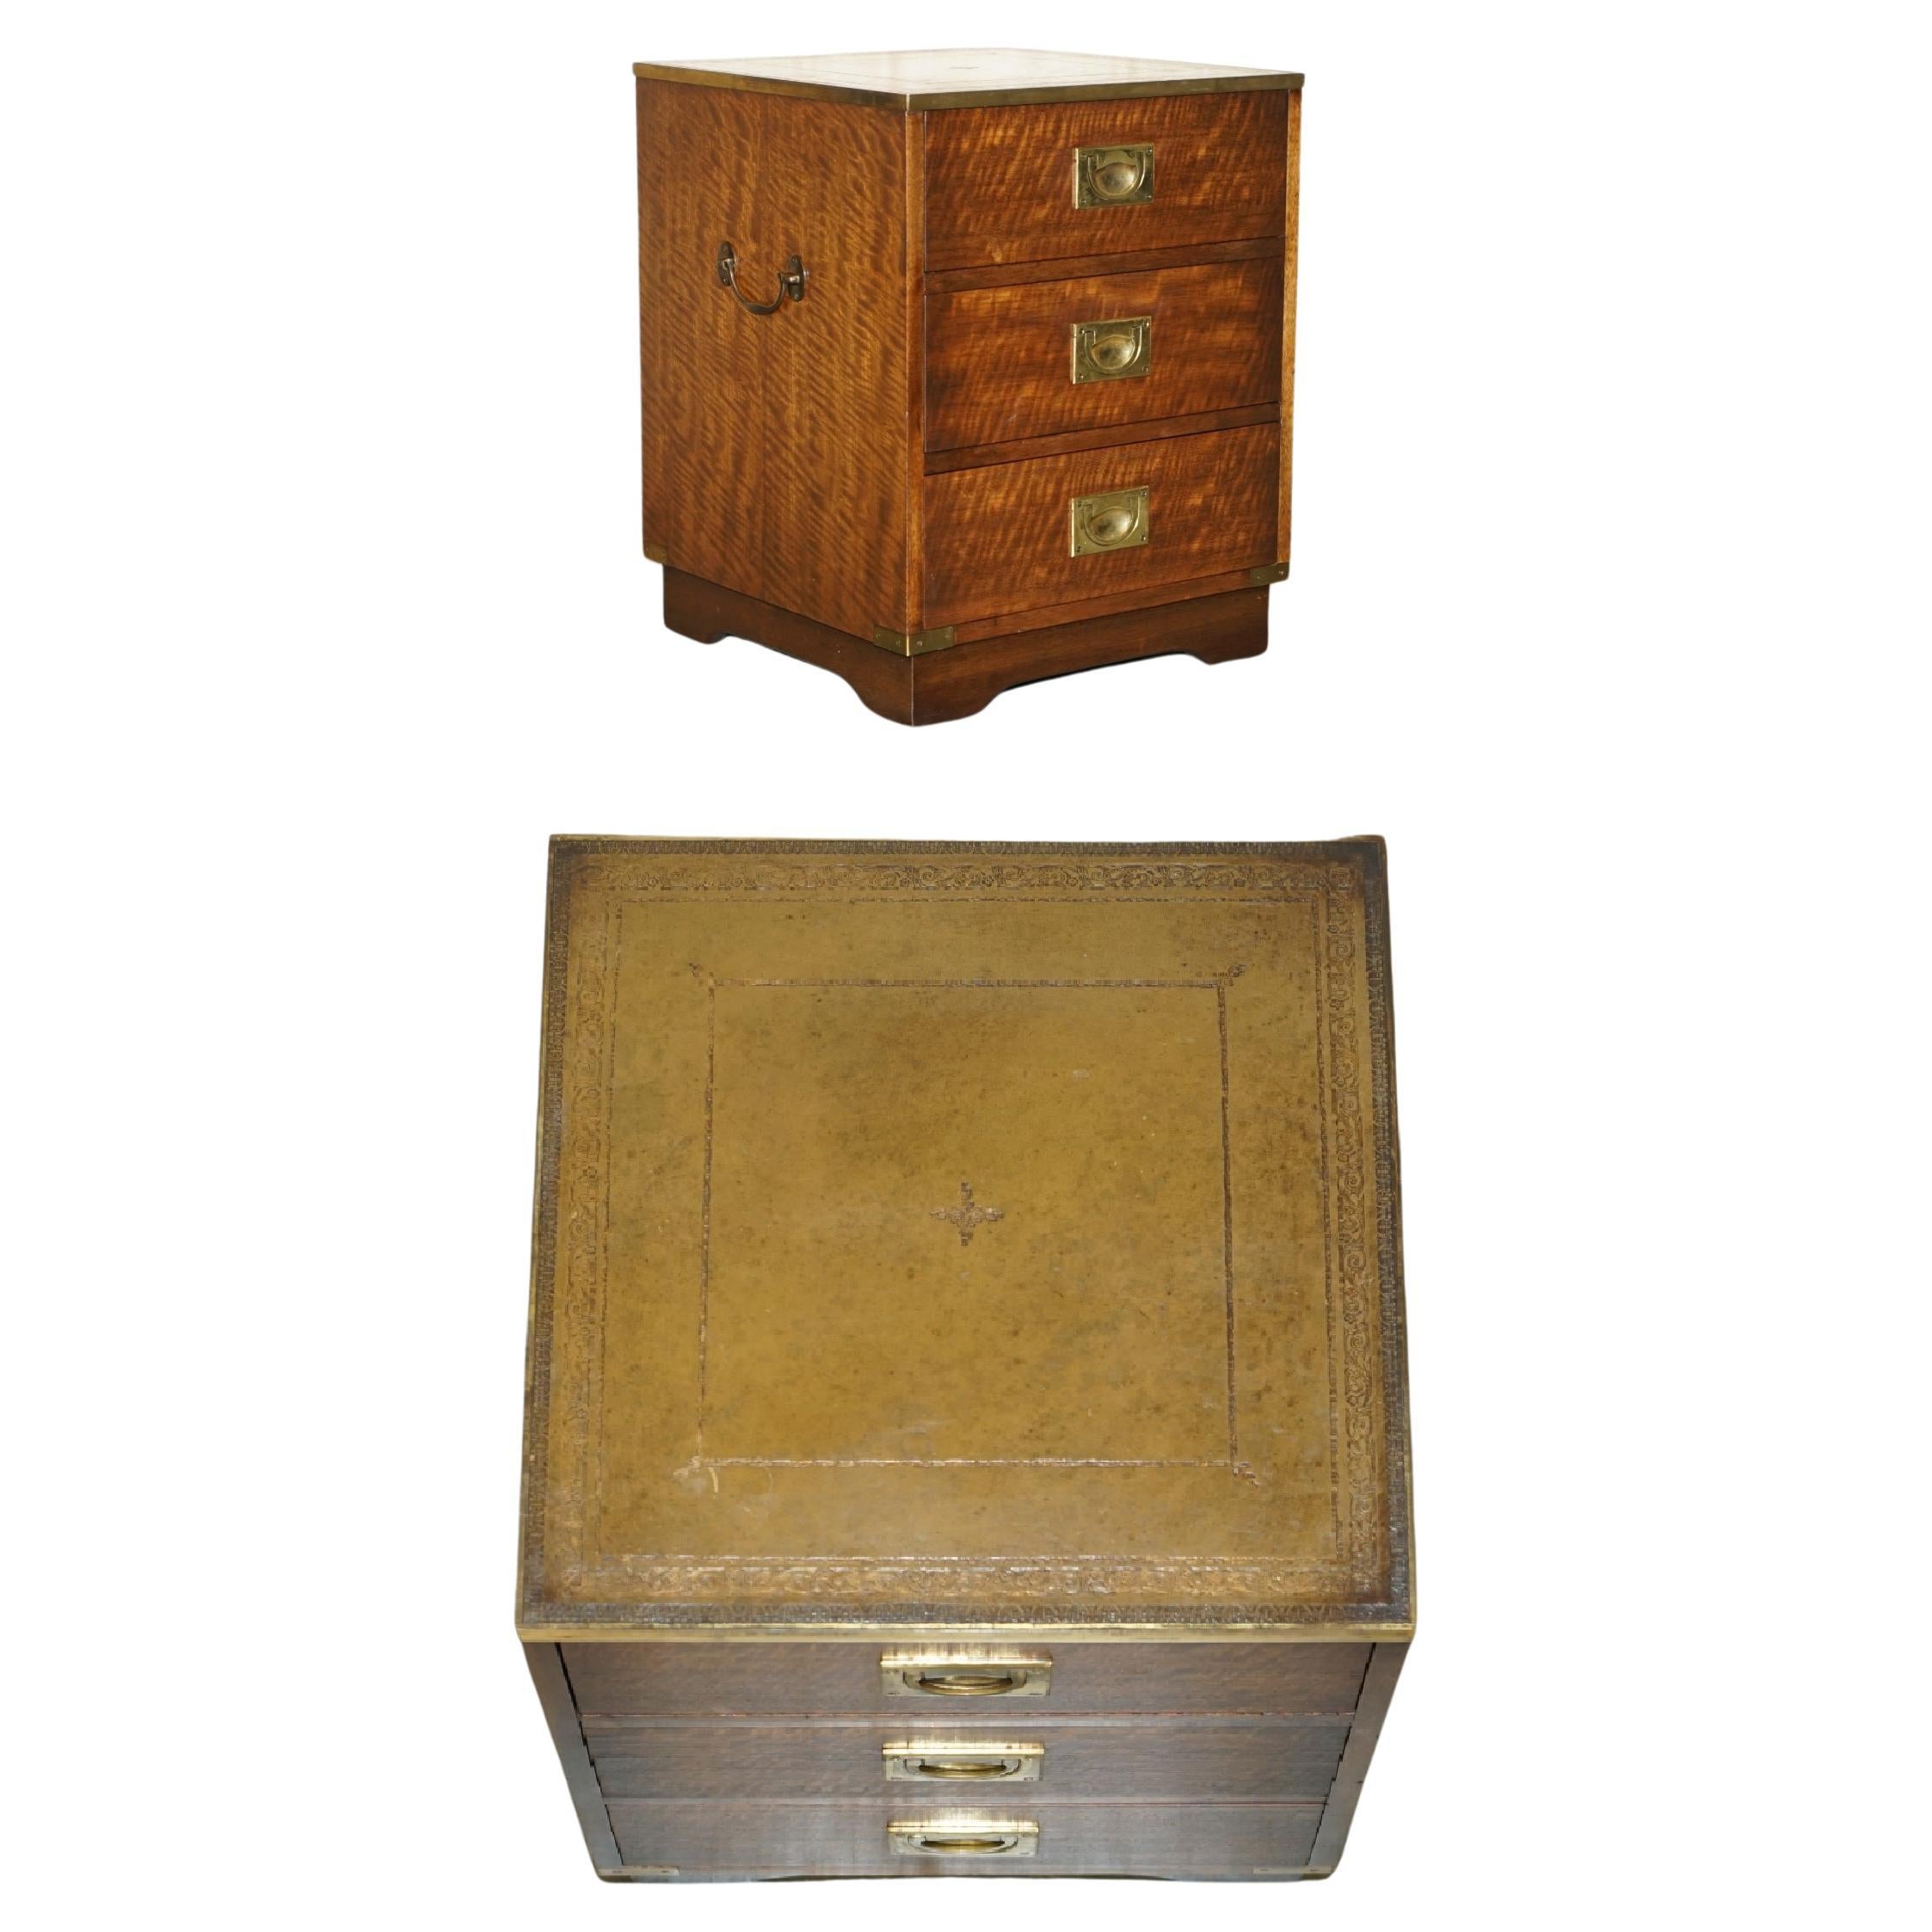 HARRODS KENNEDY Campagne MILITAIRE STUNNING TABLE DRAWERS GREEN LEATHER